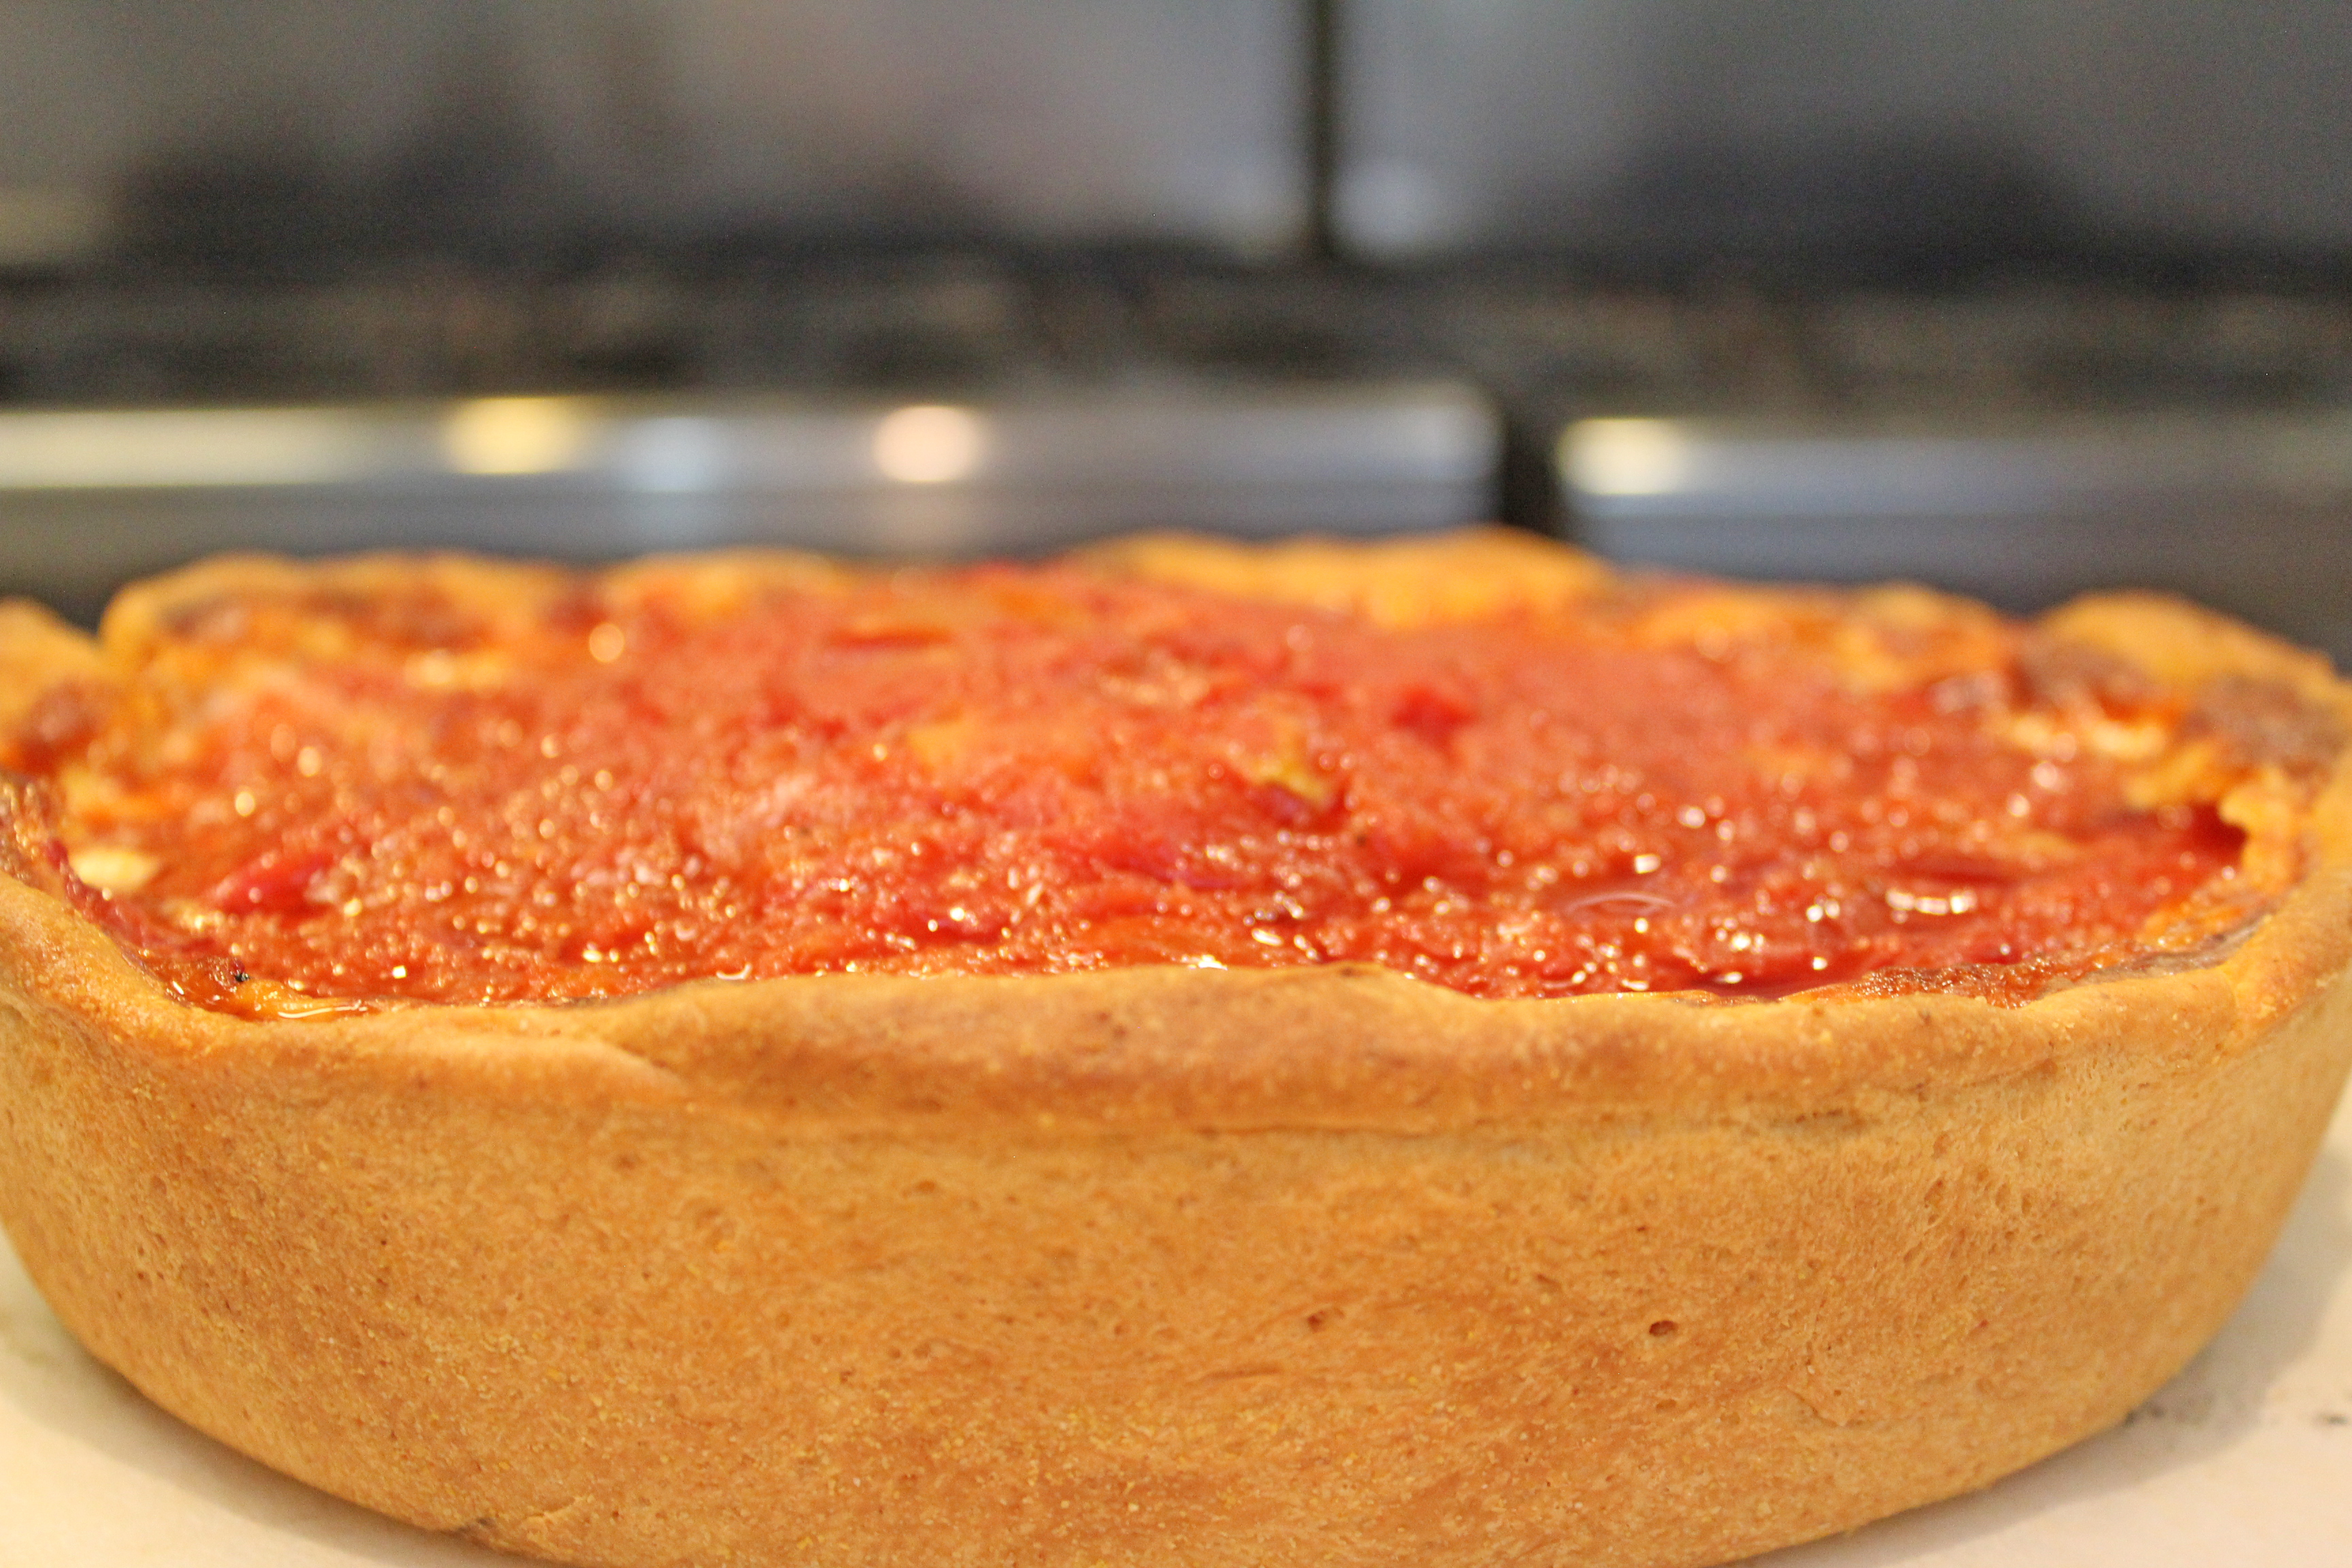 https://stellaculinary.com/sites/default/files/chicago-style-pizza-crust.jpg